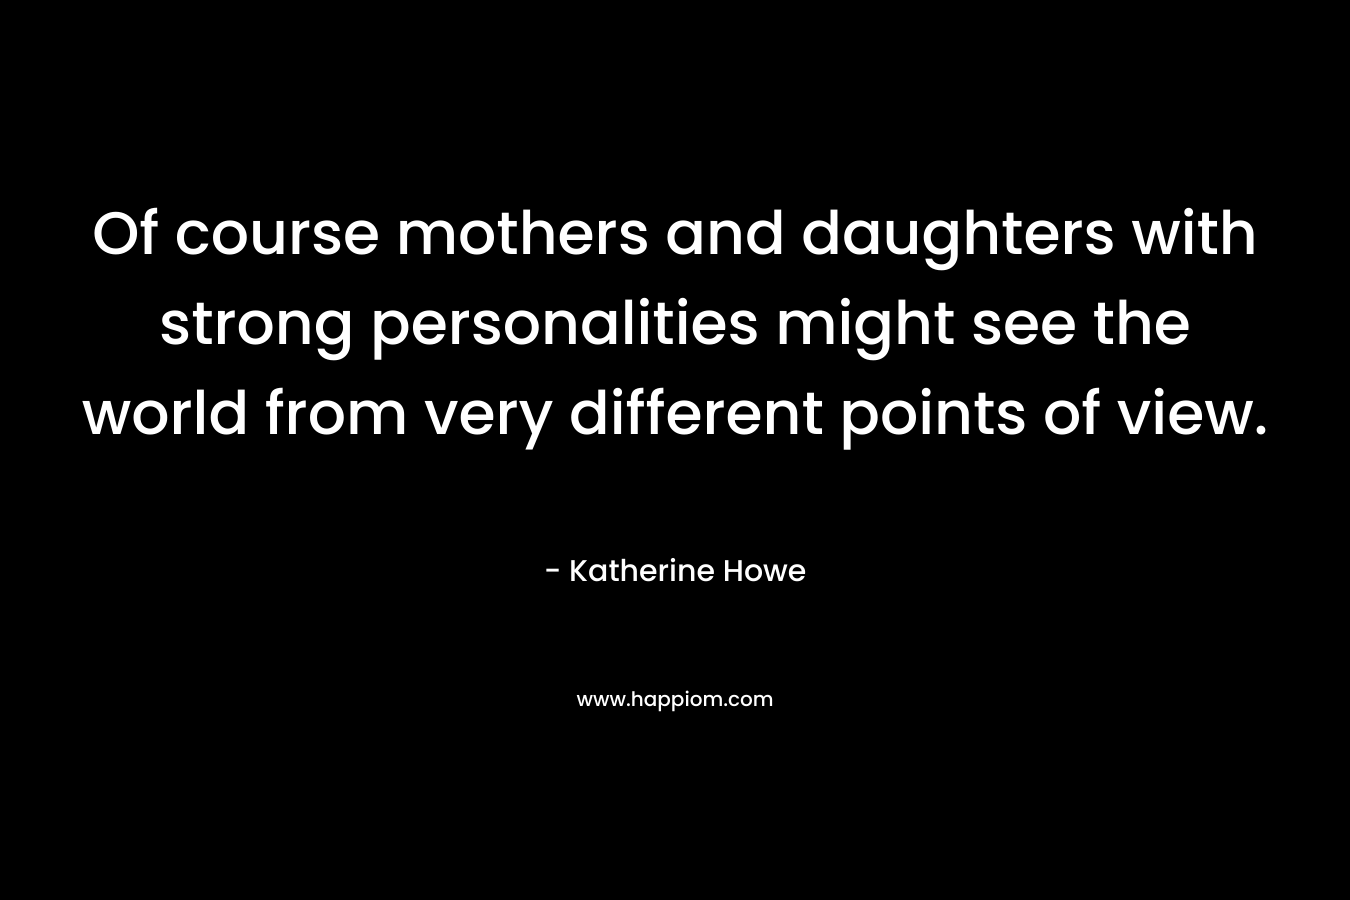 Of course mothers and daughters with strong personalities might see the world from very different points of view. – Katherine Howe